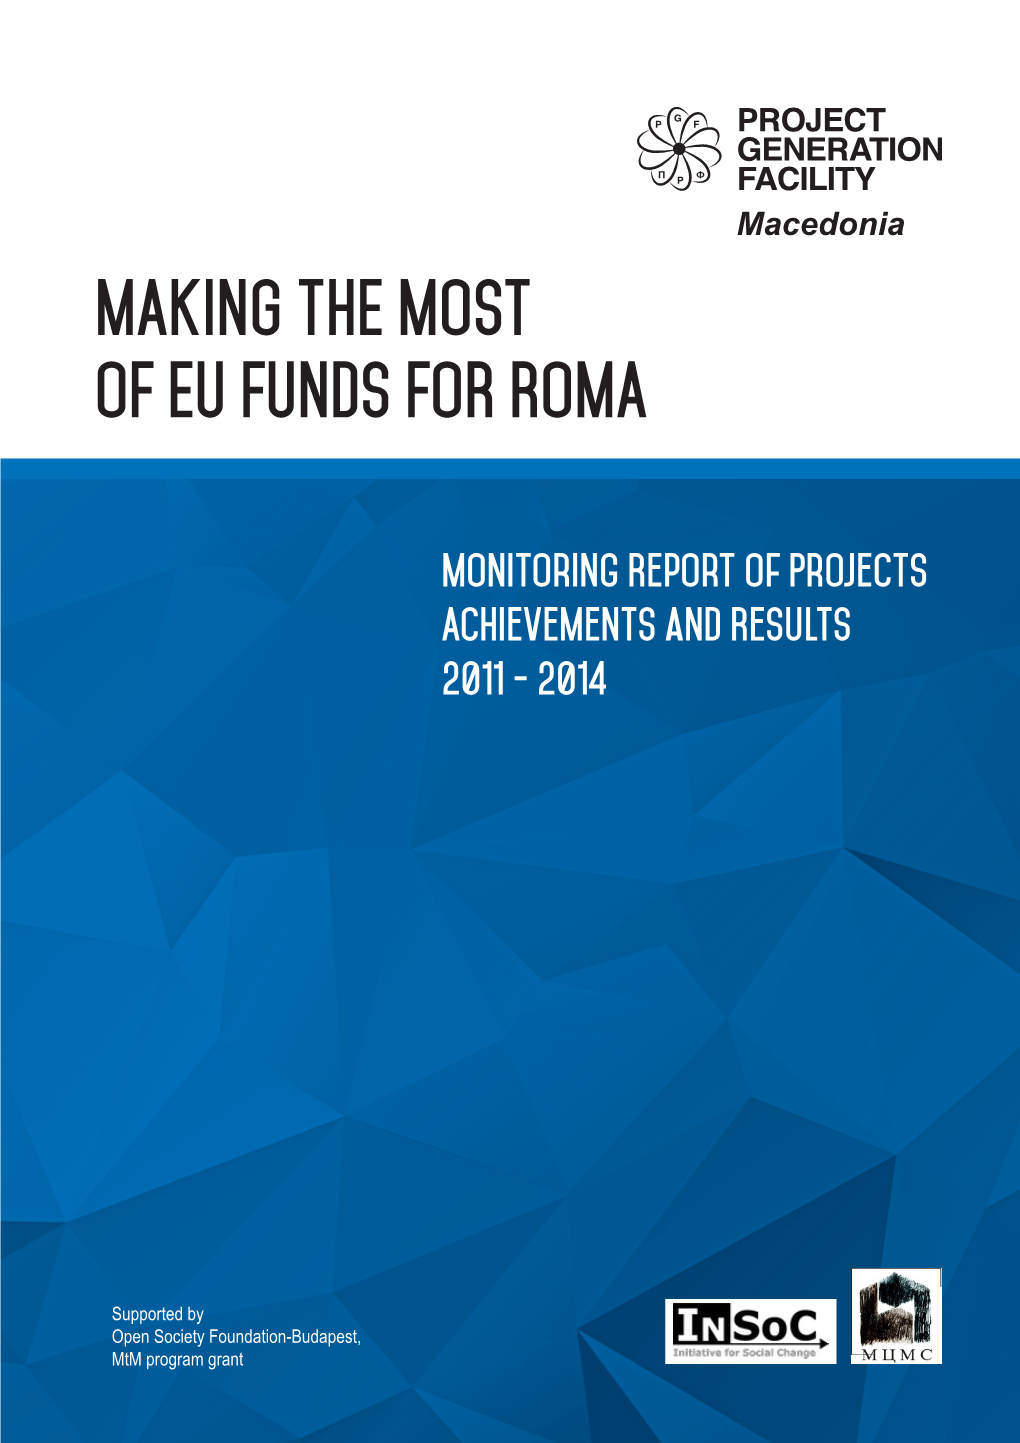 Making the Most of Eu Funds for Roma